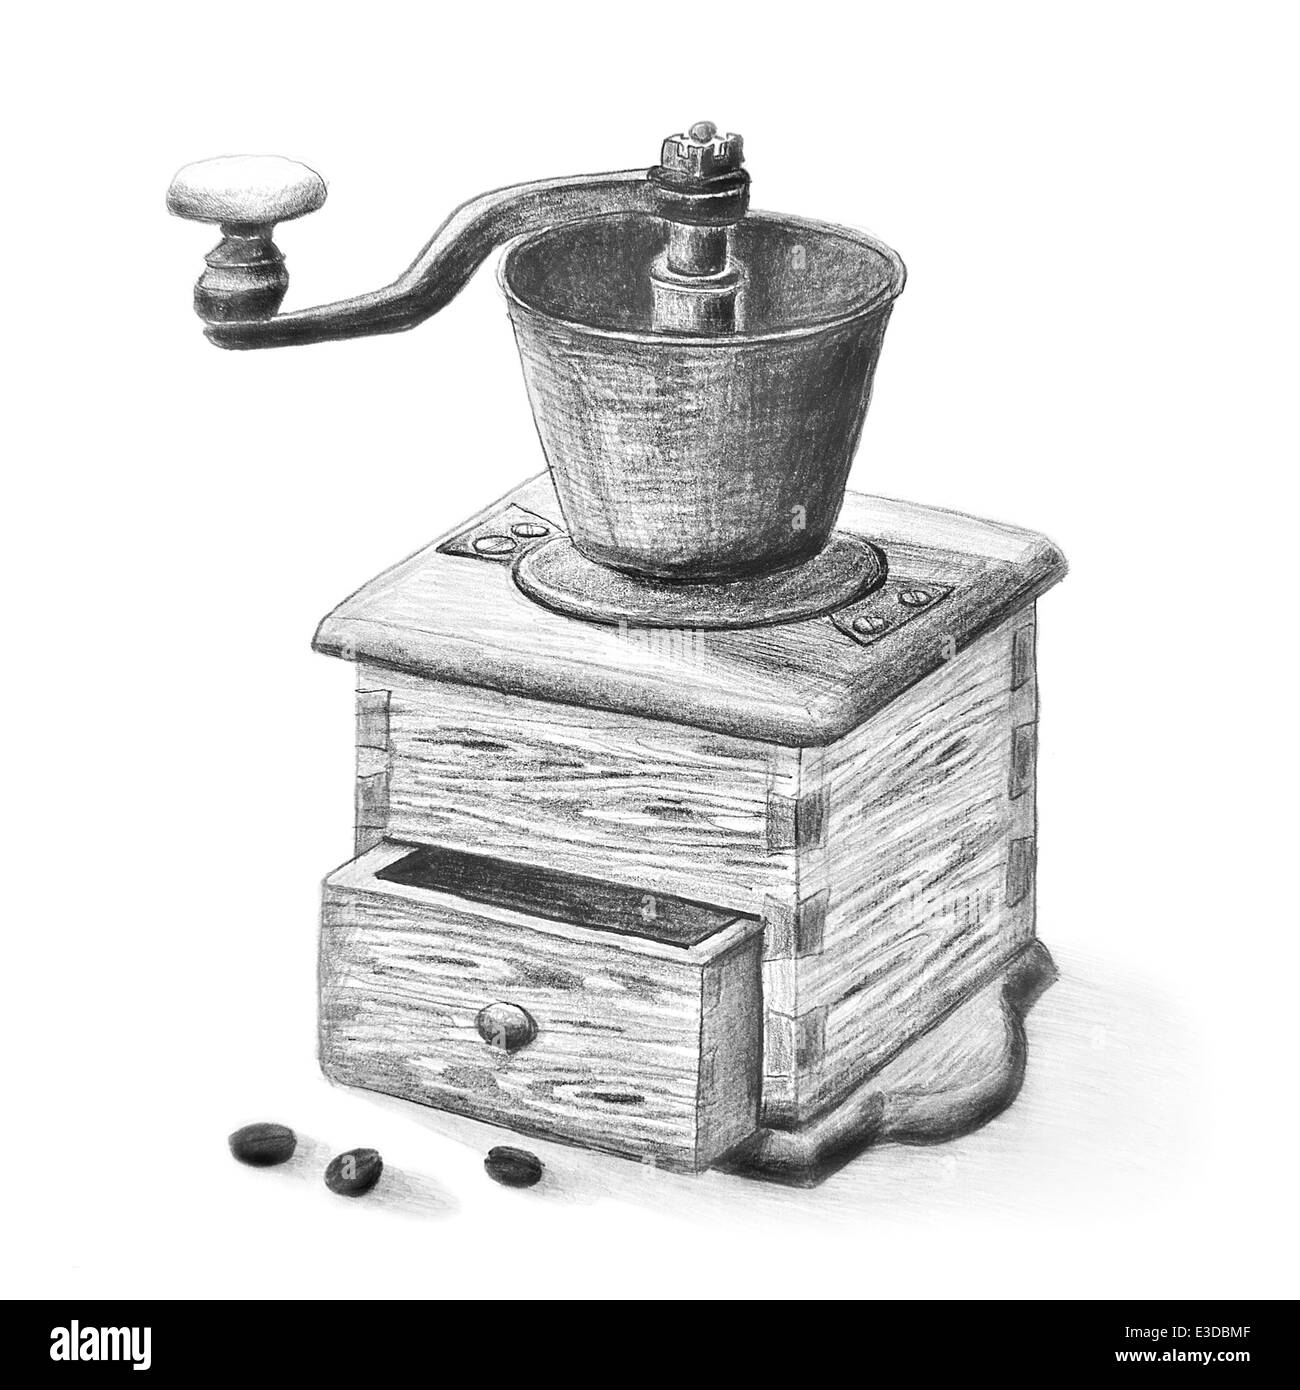 Antiquarian wooden coffee grinder with crank, drawer and coffee beans. Detailed freehand pencil drawing, vintage style. Stock Photo